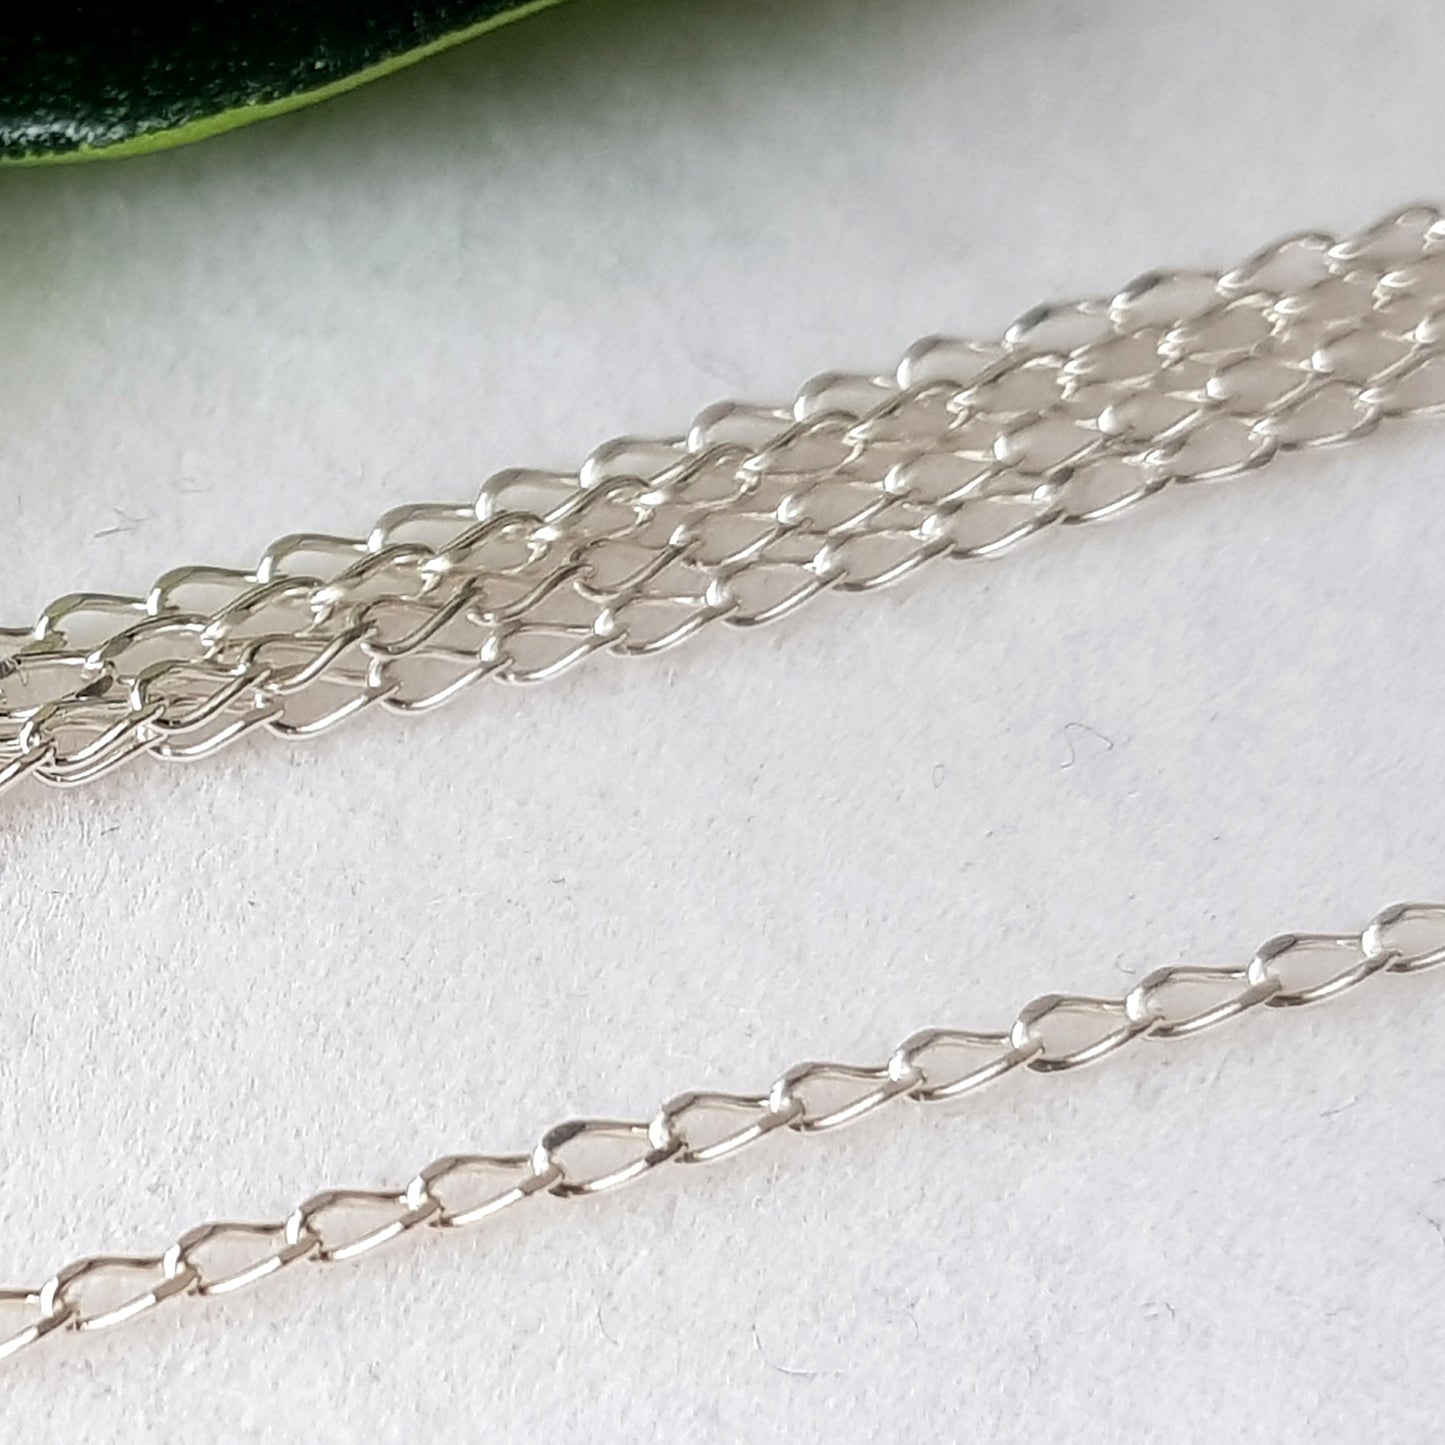 Chains - Long Curb Diamond Cut Chain Genuine Sterling Silver Unfinished | Jewellery Making Supply